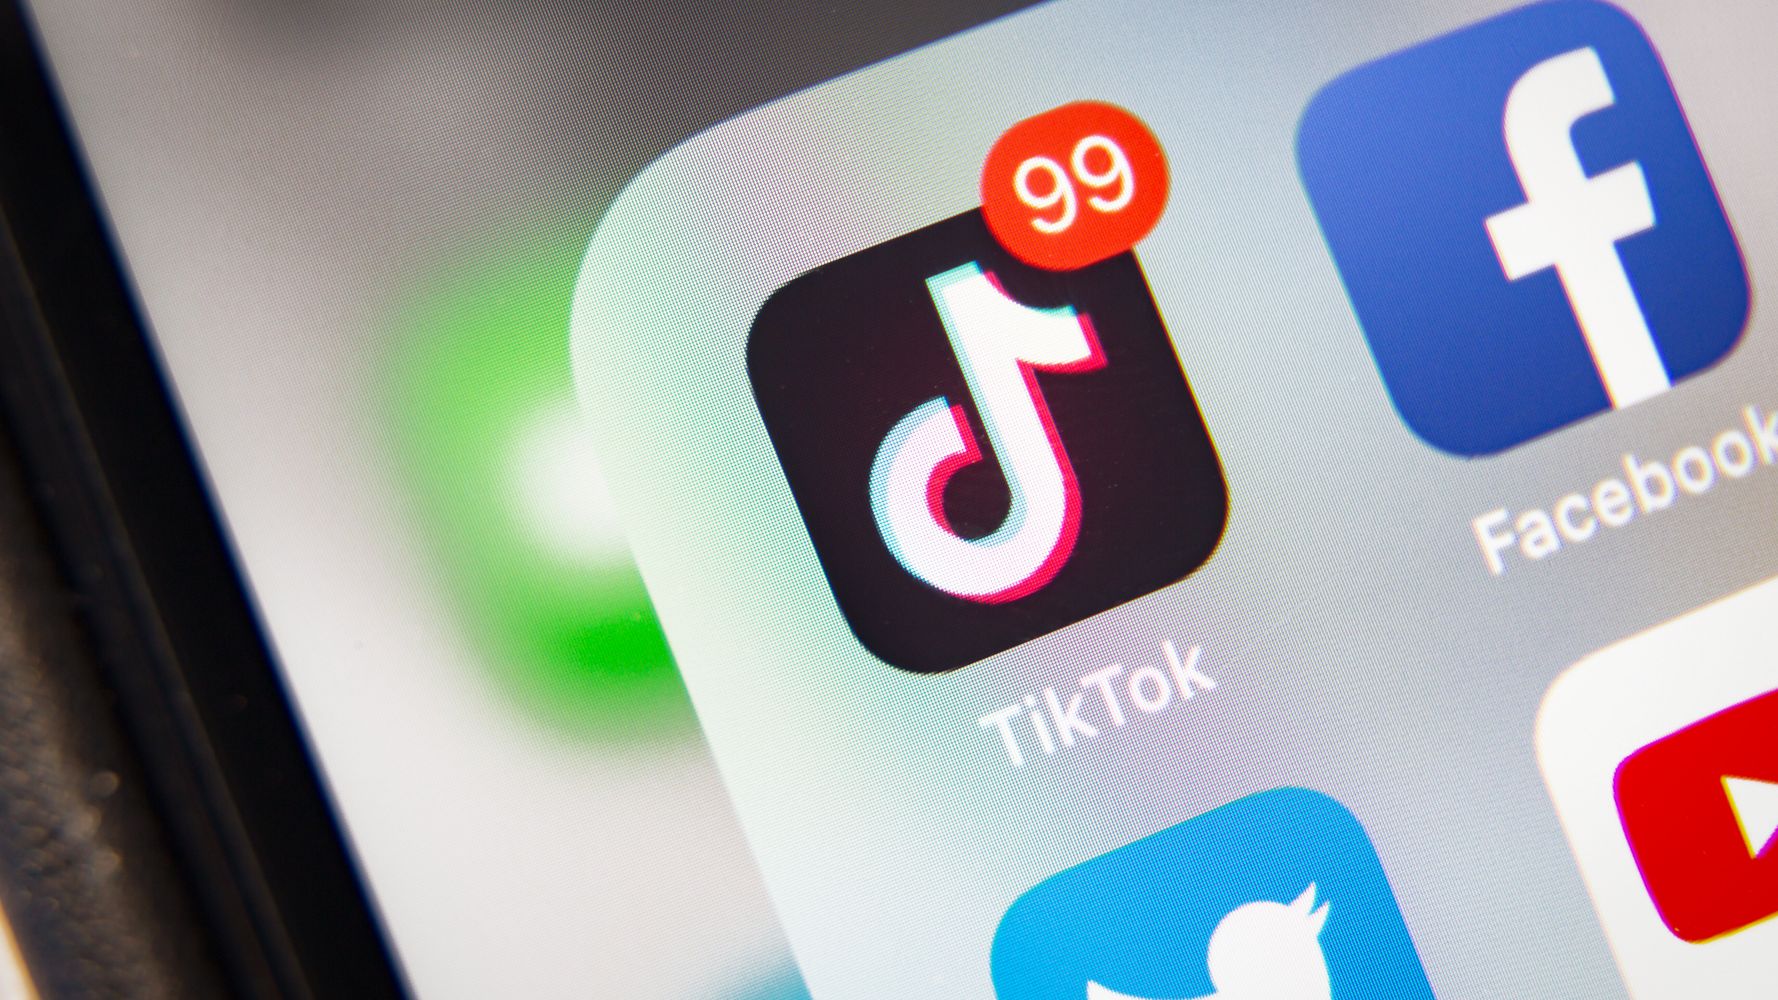 TikTok user says she has received obscene exposure for shorts, crop top outfit